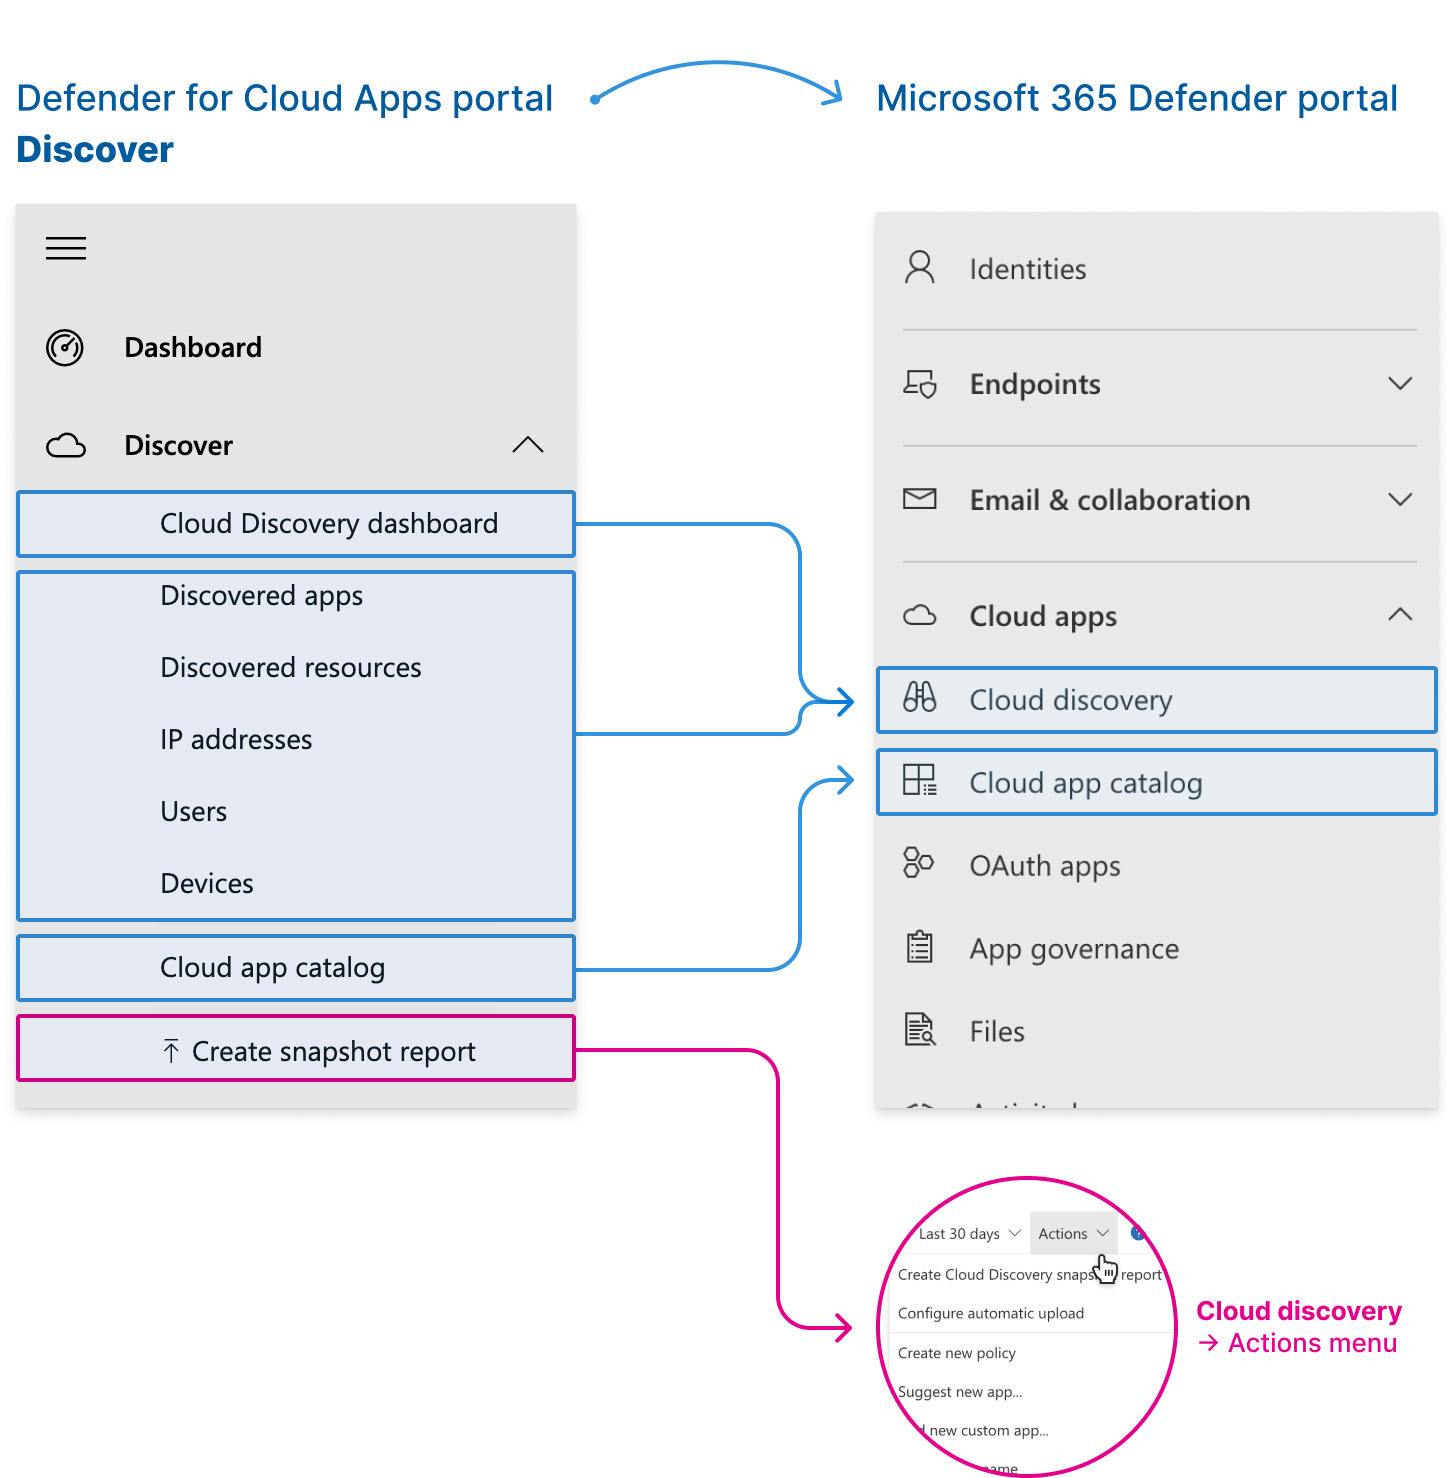 The new locations for Cloud Discovery features in the Microsoft Defender portal